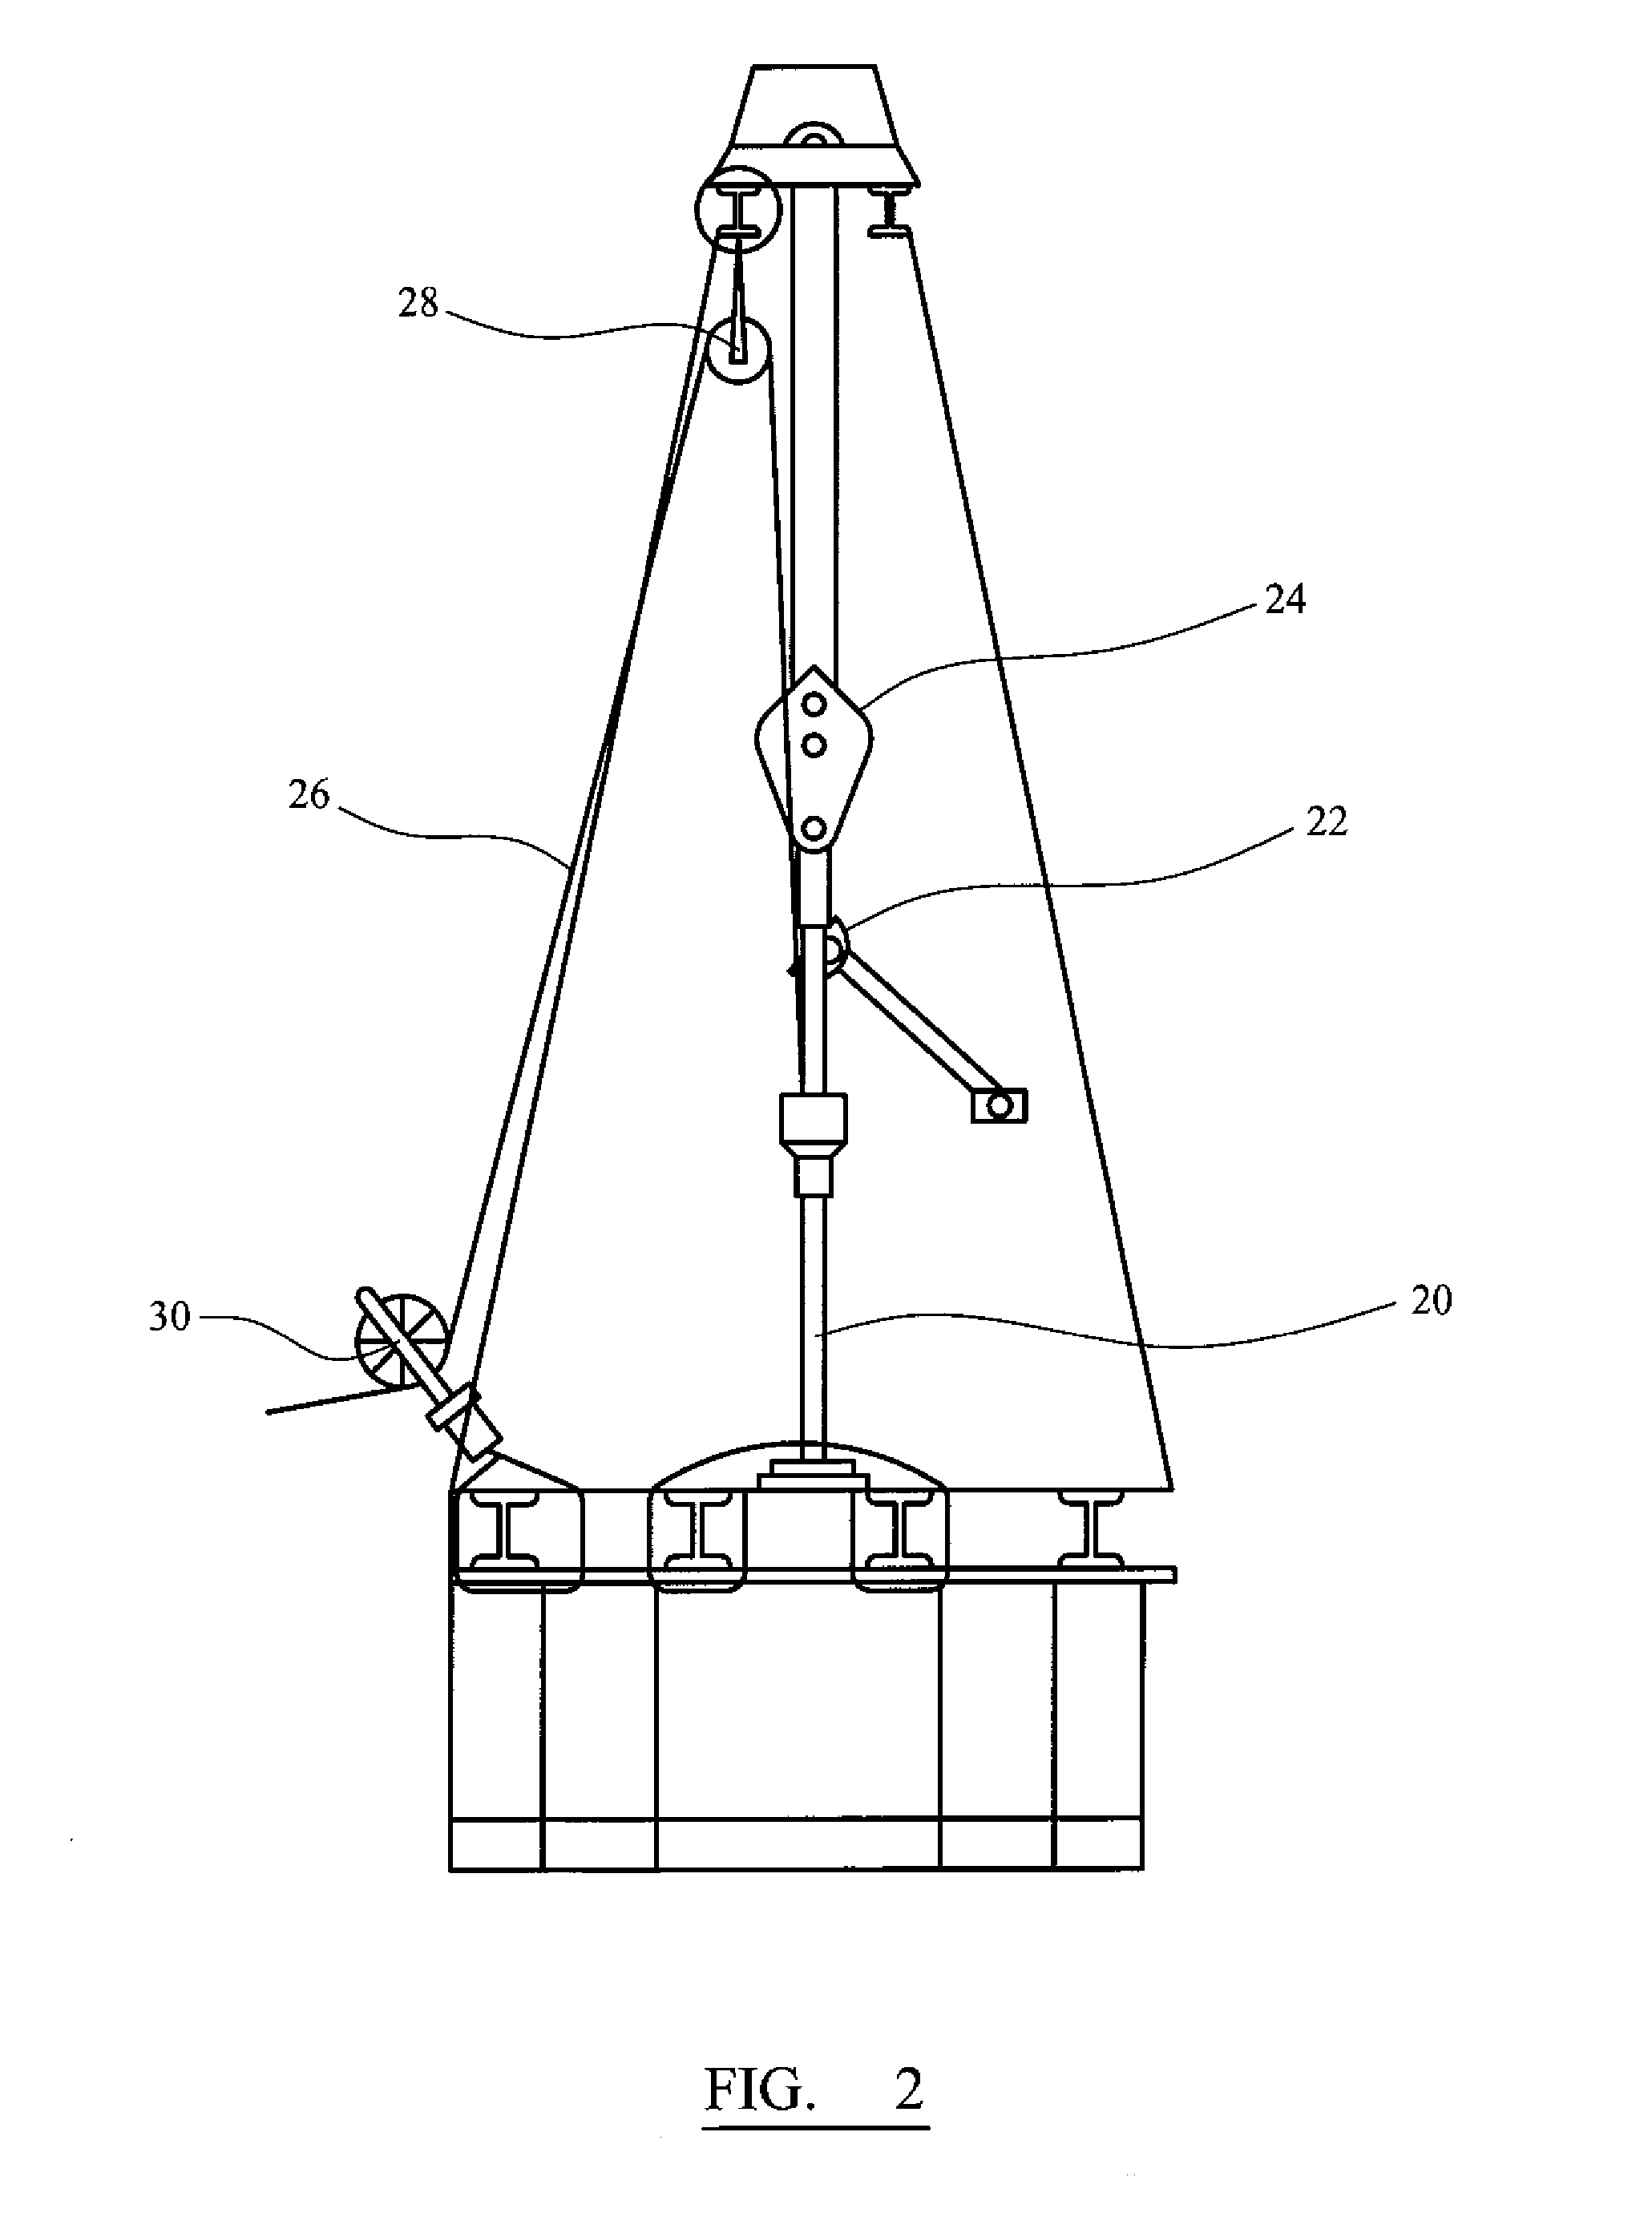 Method of determination of a stuck point in drill pipes by measuring the magnetic permeability of pipes